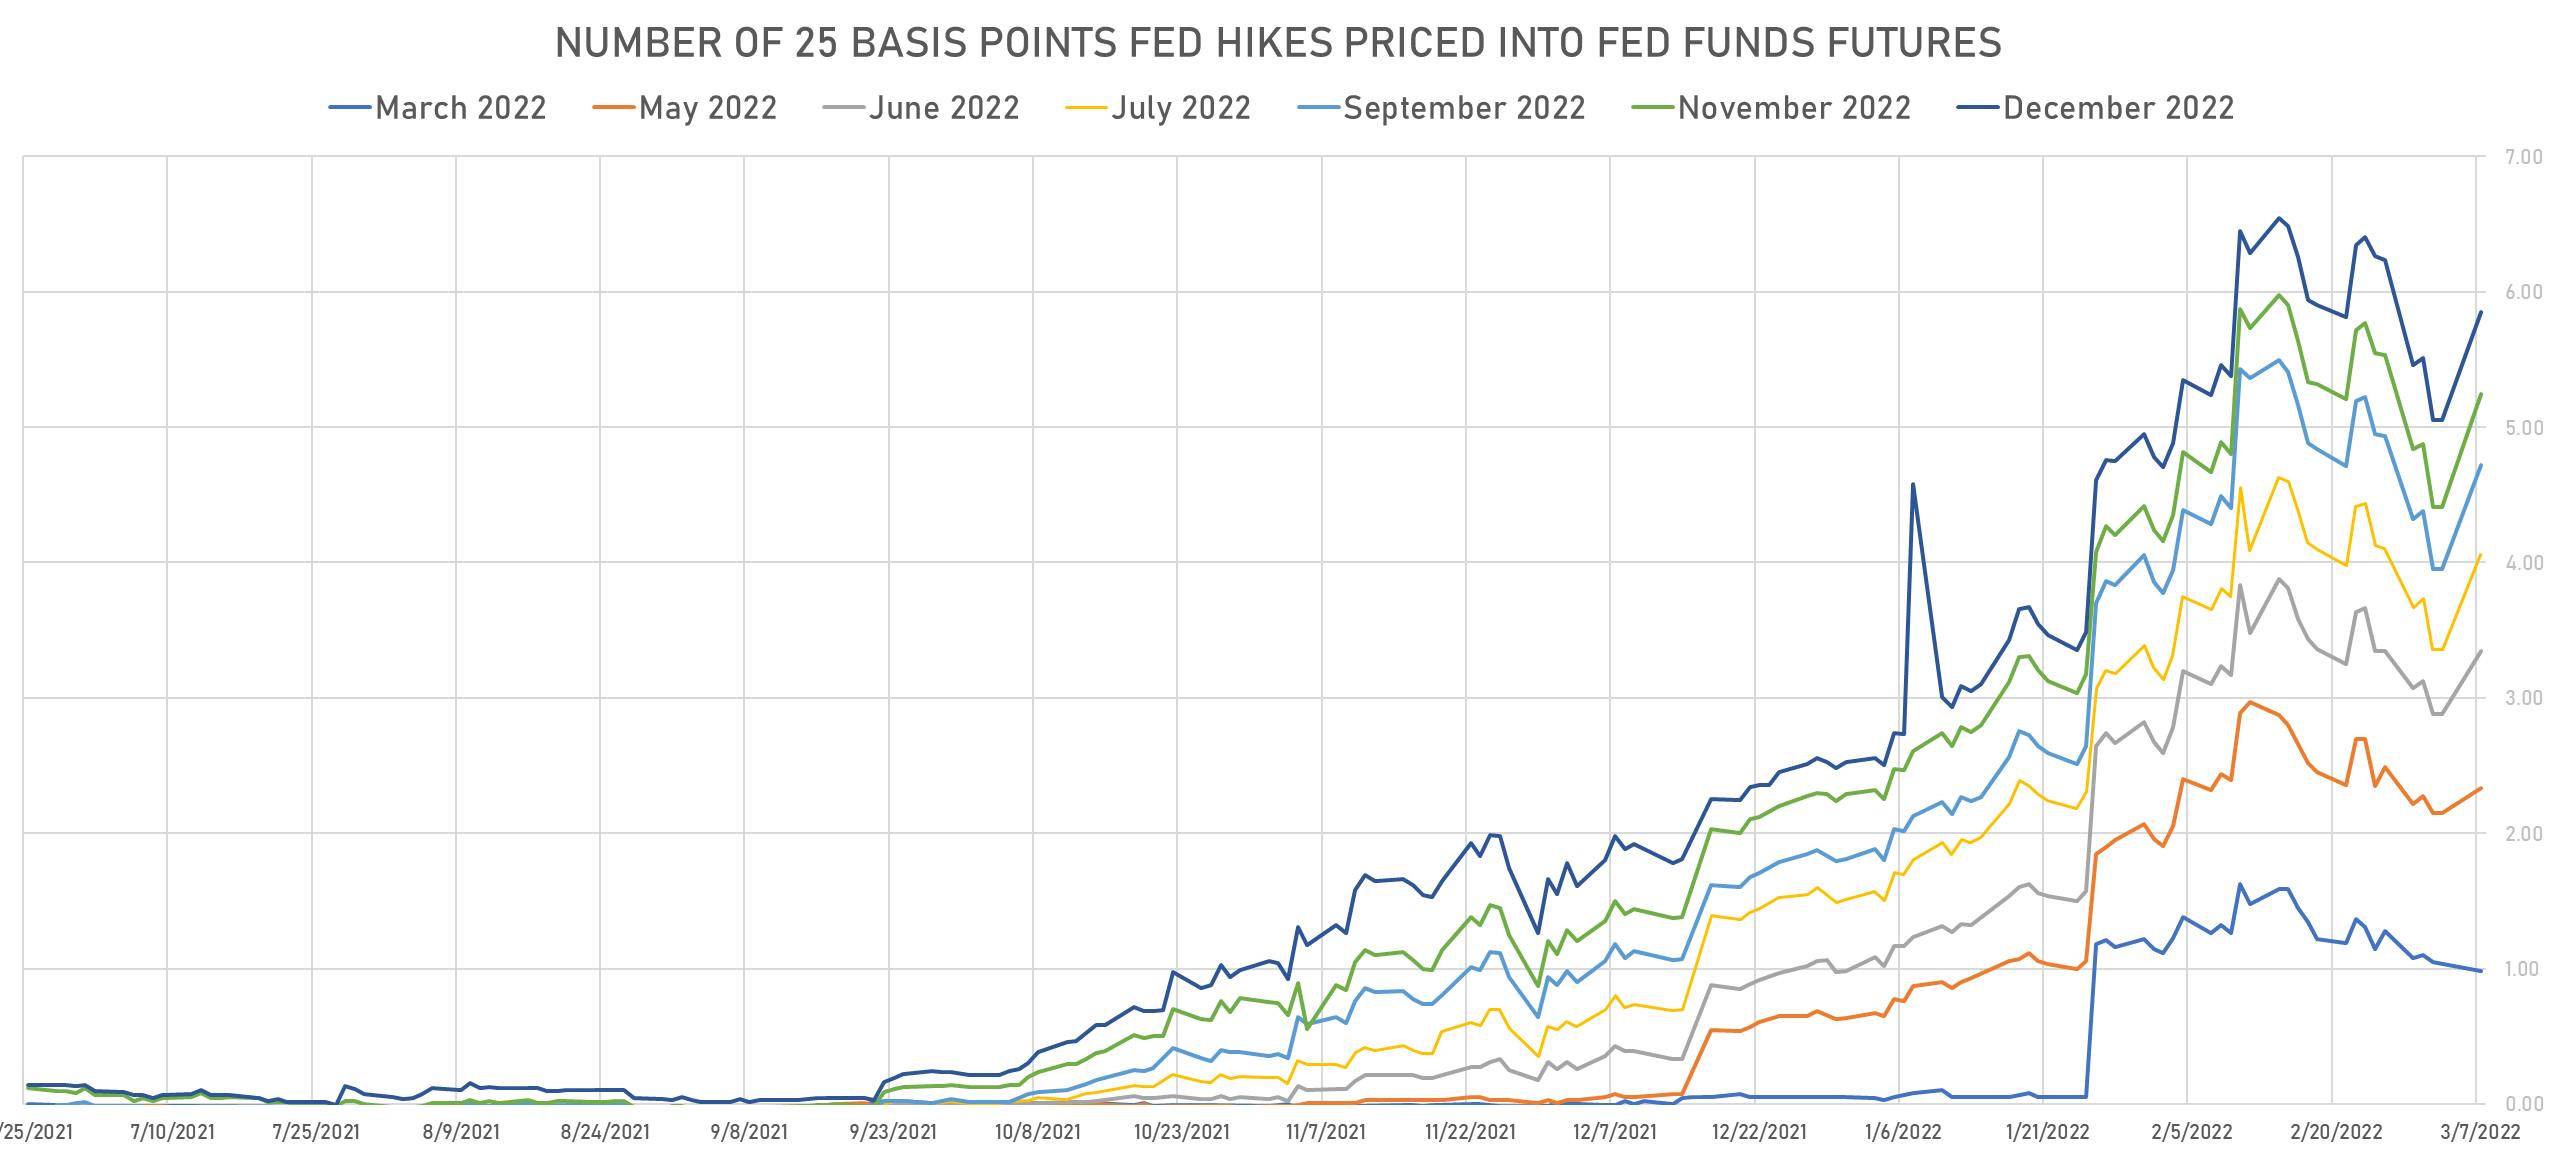 Implied Fed Hikes in 2022 | Sources: phipost.com, Refinitiv data